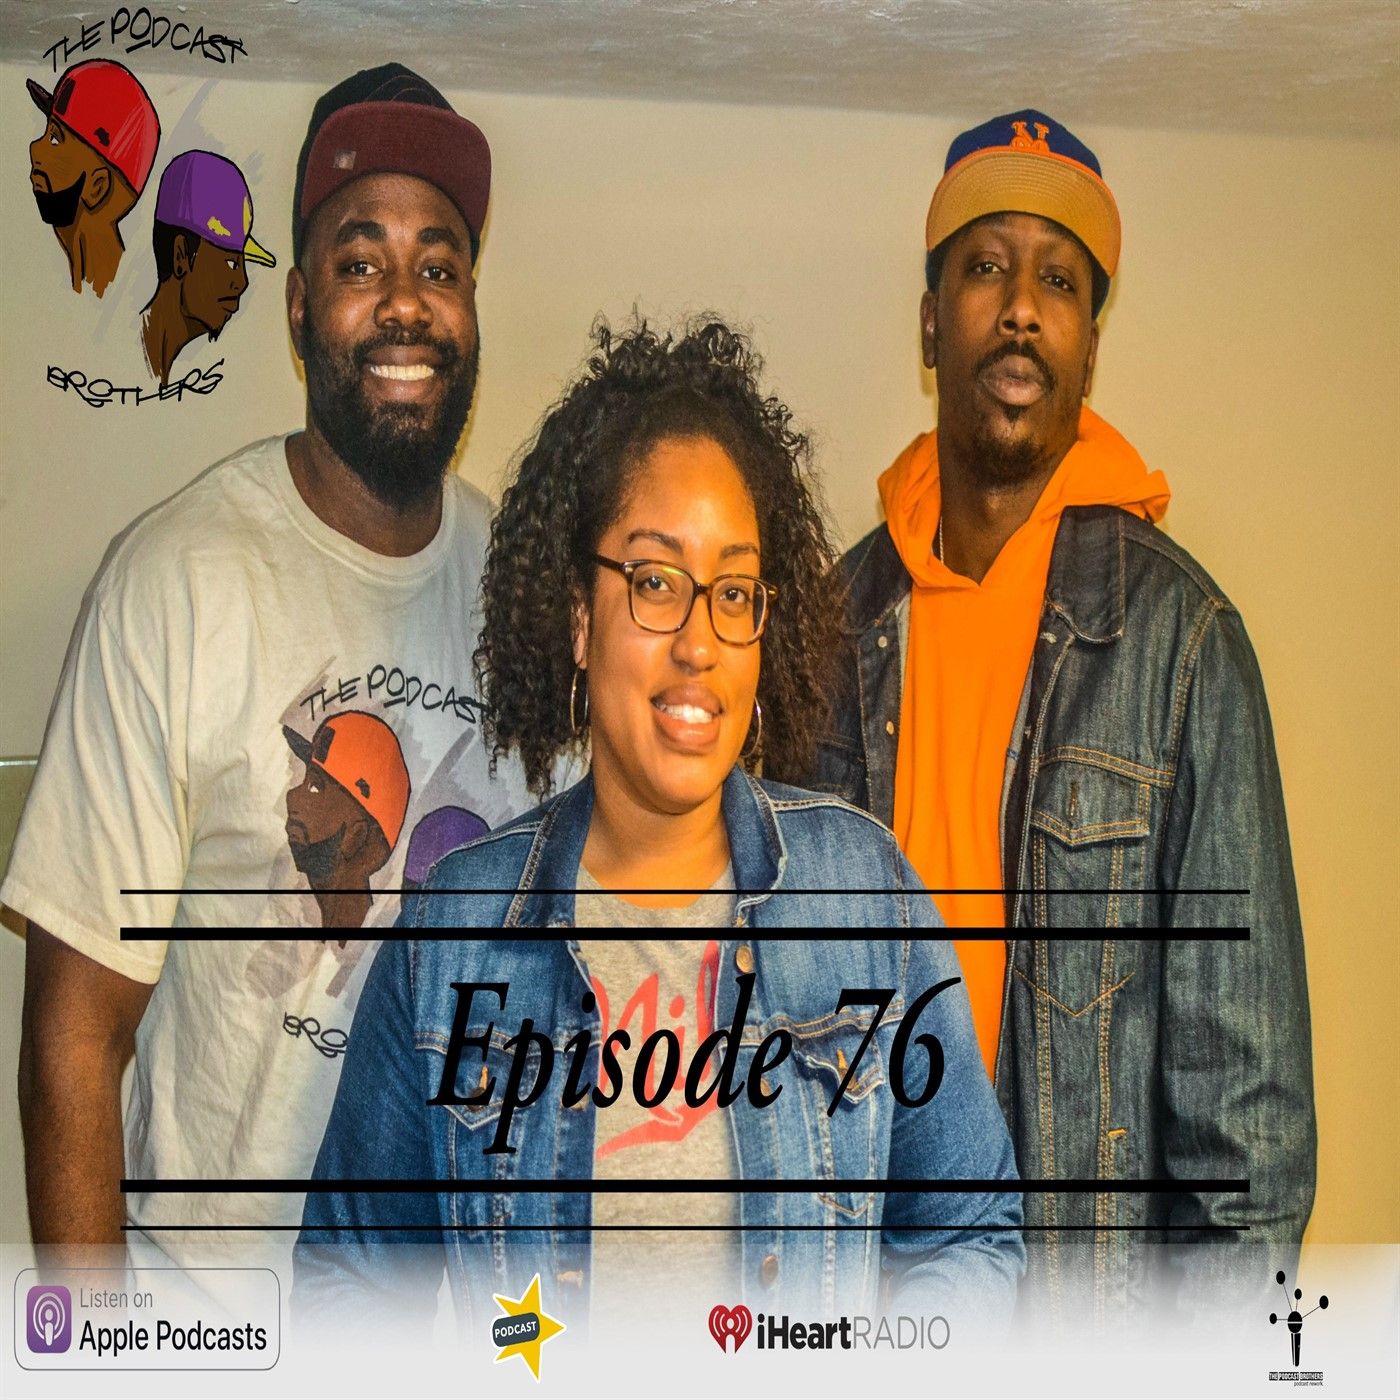 We get the Boasters Boasting | Episode 76